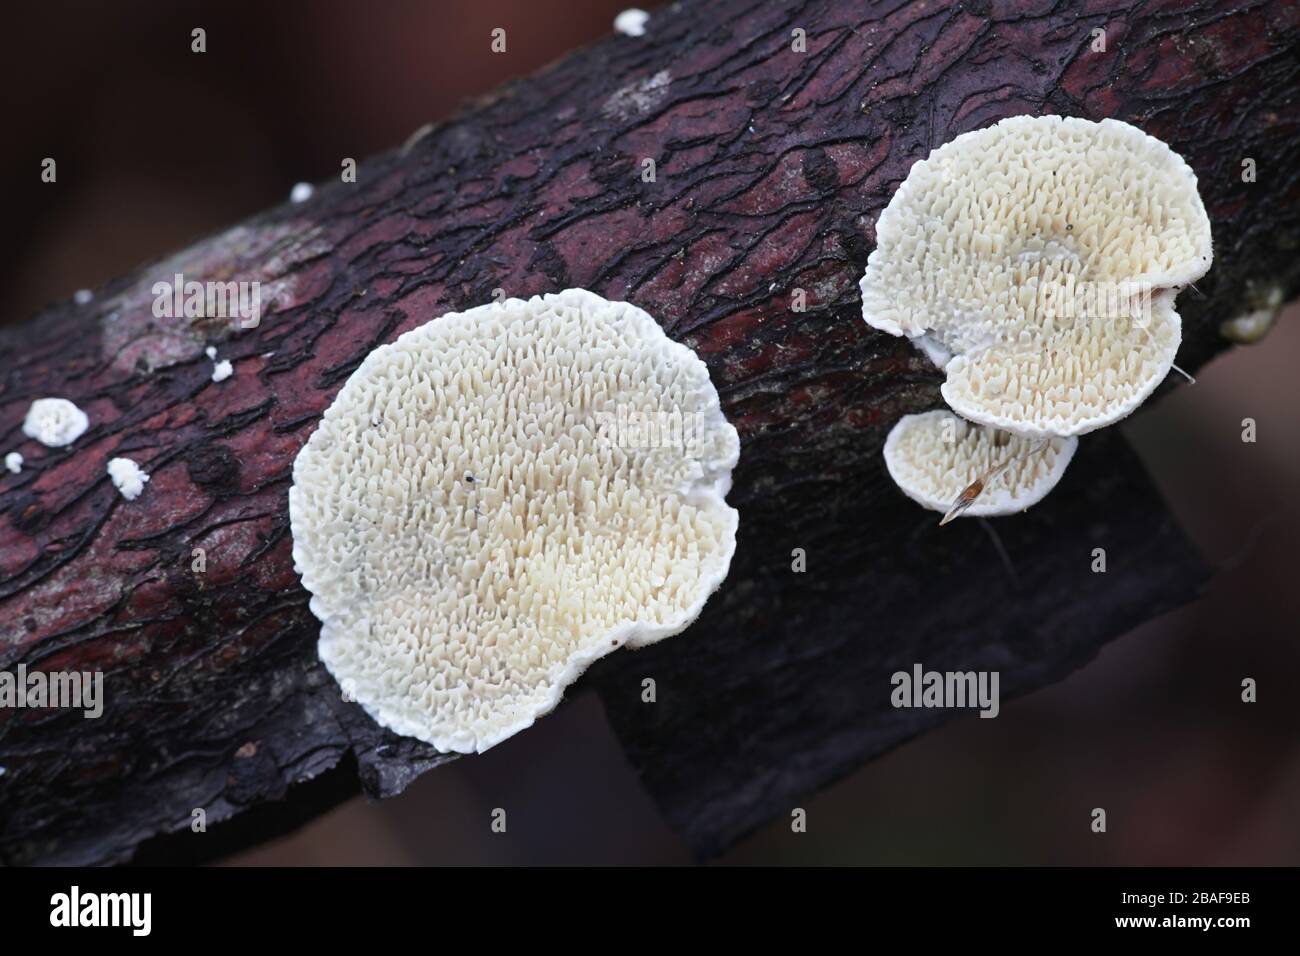 Irpex lacteus, a white rot crust fungus studied for biofuel production Stock Photo